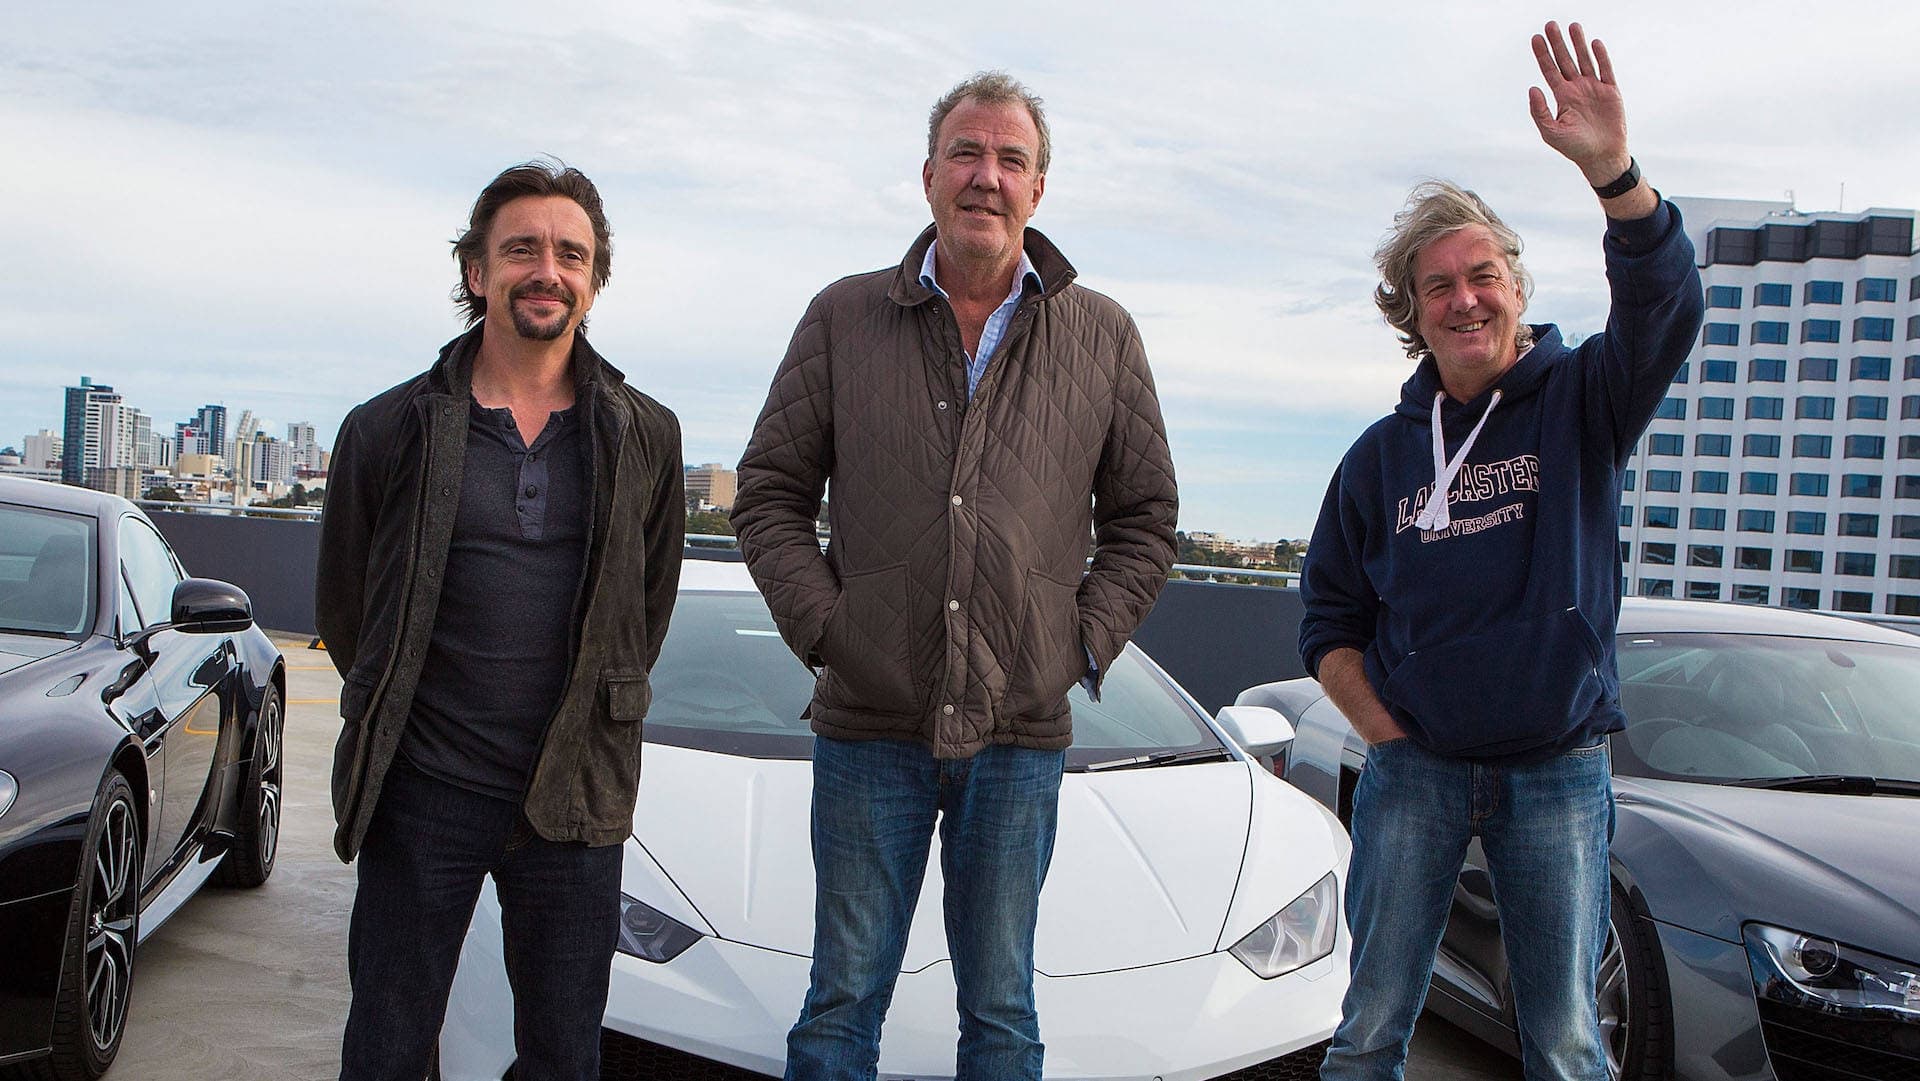 A Hellcat in Italy? Hell Yes. The Grand Tour’s Third Episode Looks Promising